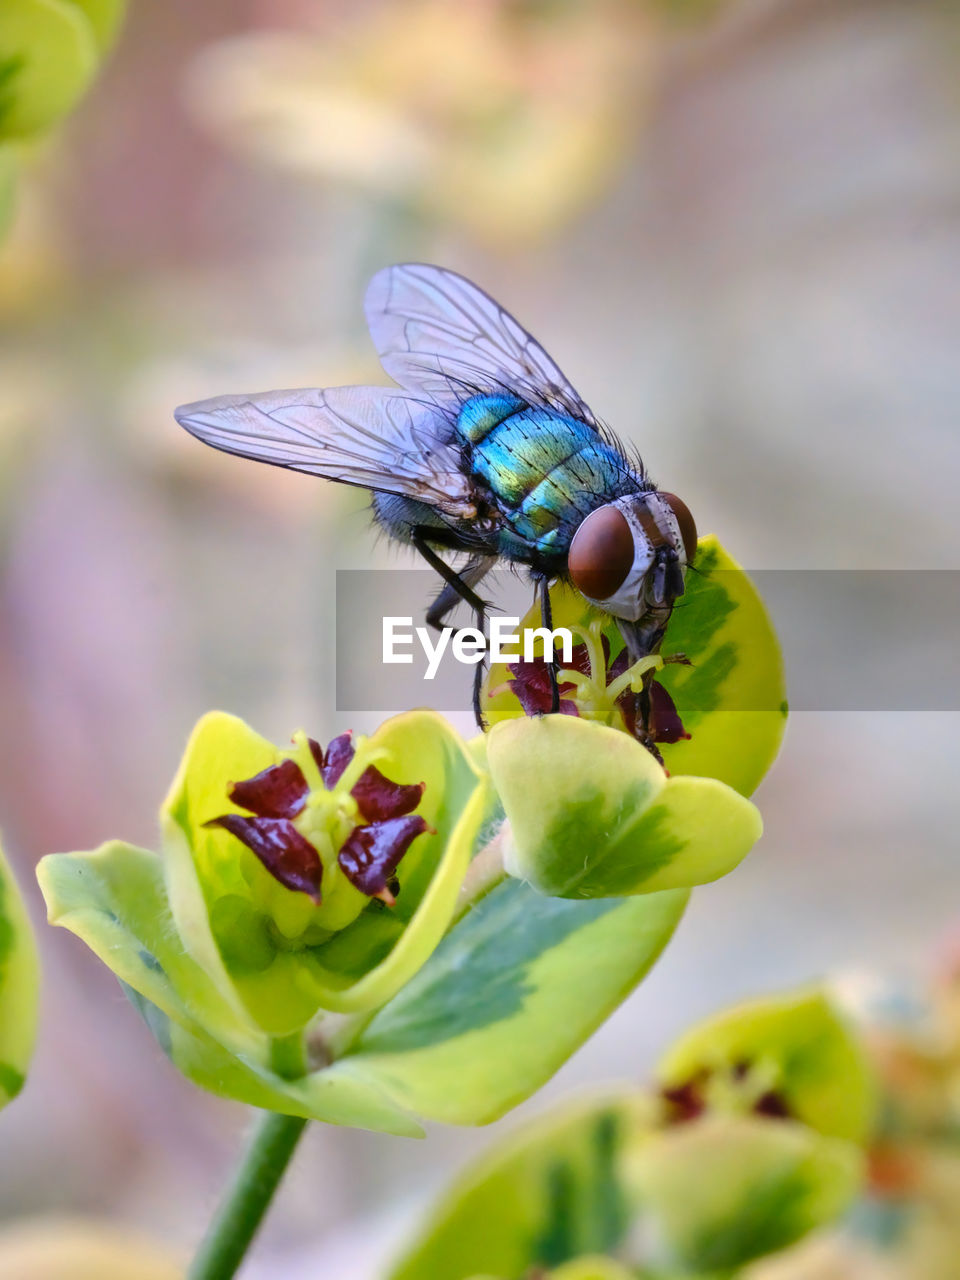 Iridescent fly pollinating a flower